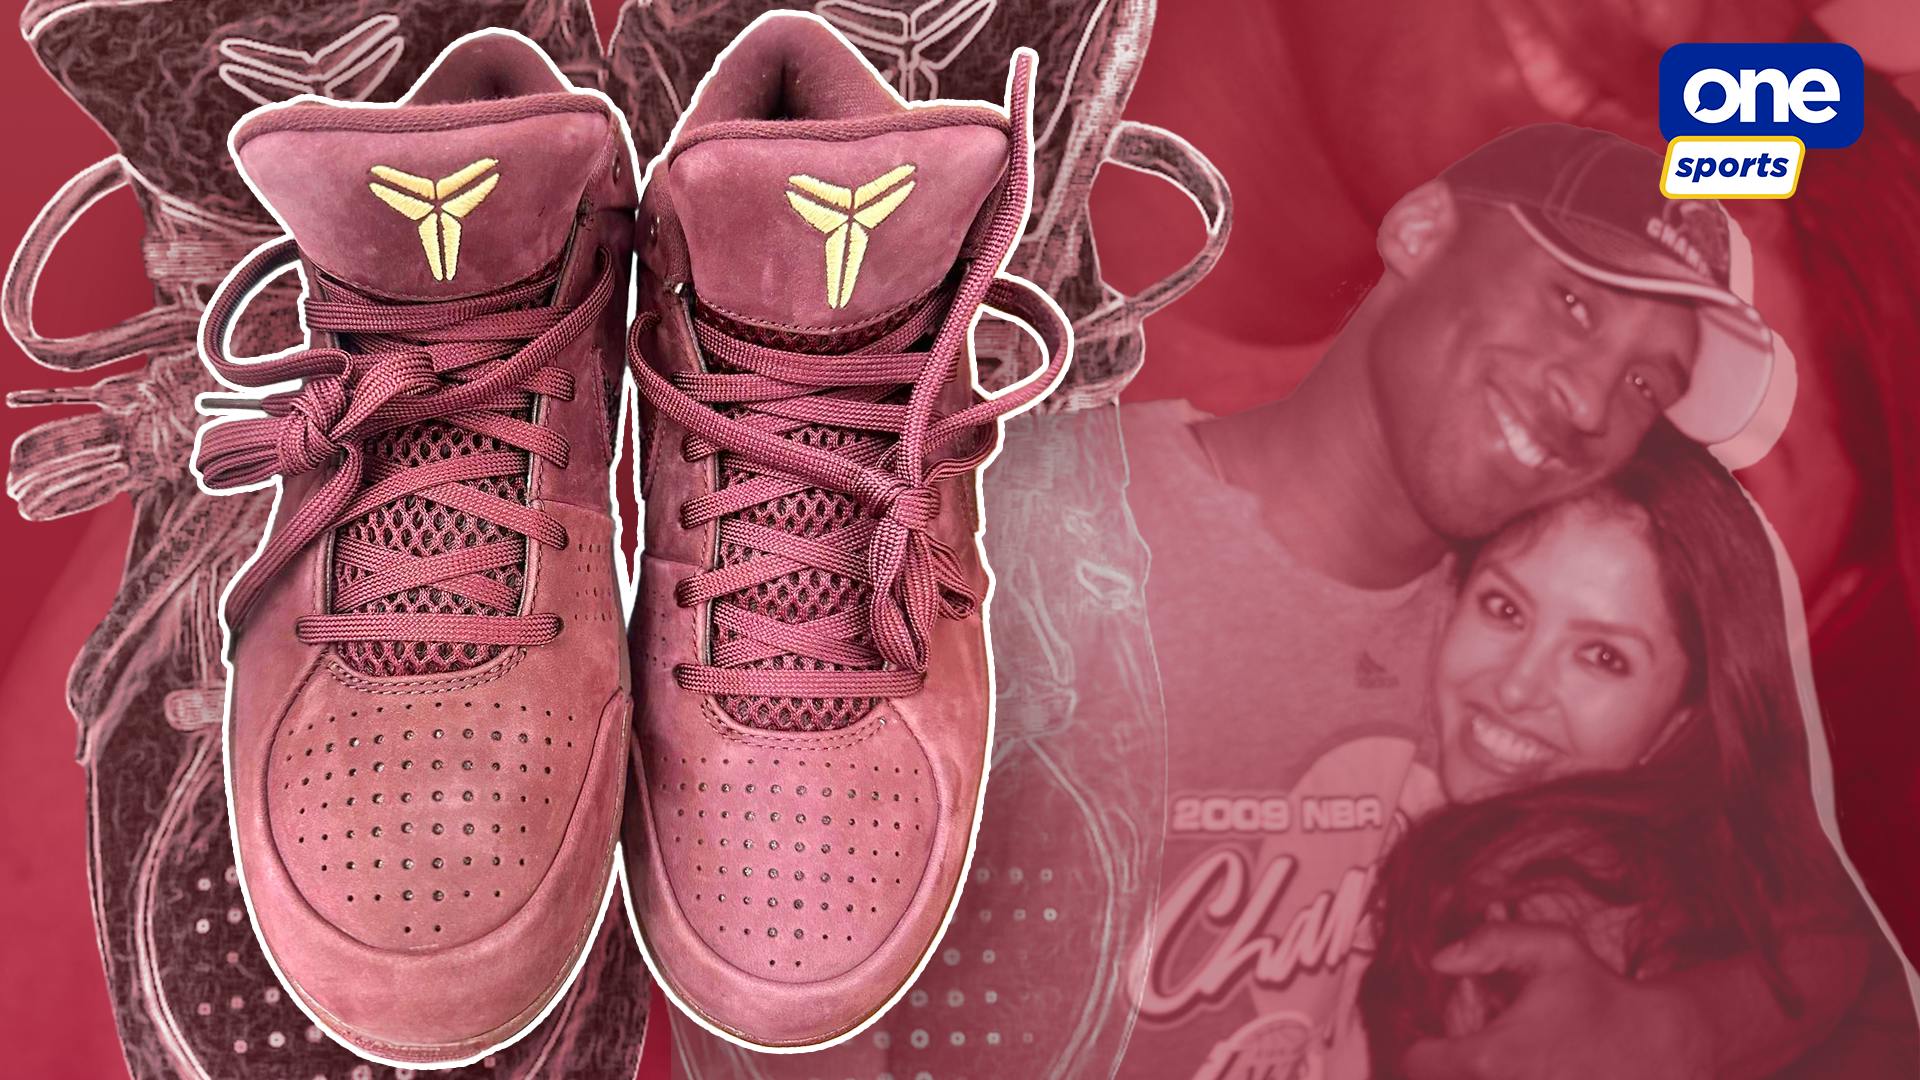 #MambaForever | Vanessa Bryant offers first look at new Kobe PEs